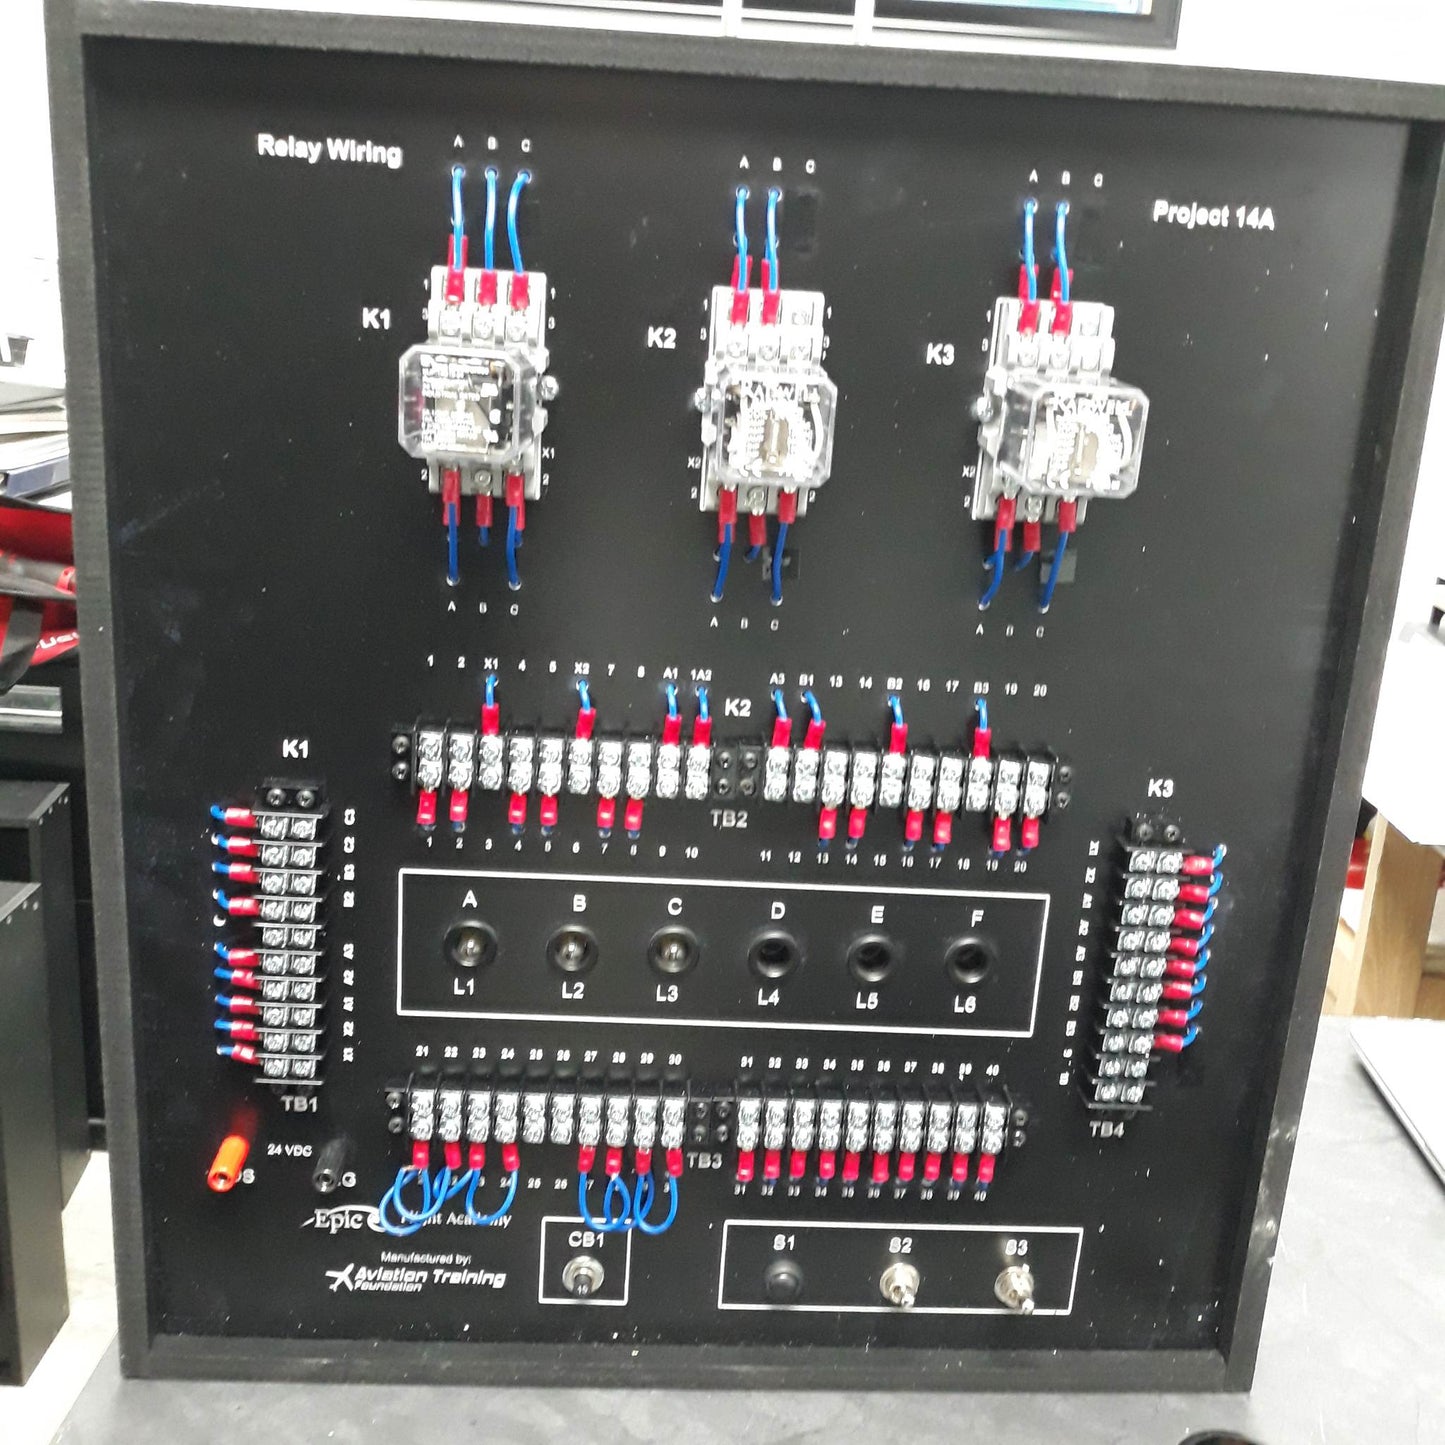 Board 15 - WR Relay Panel